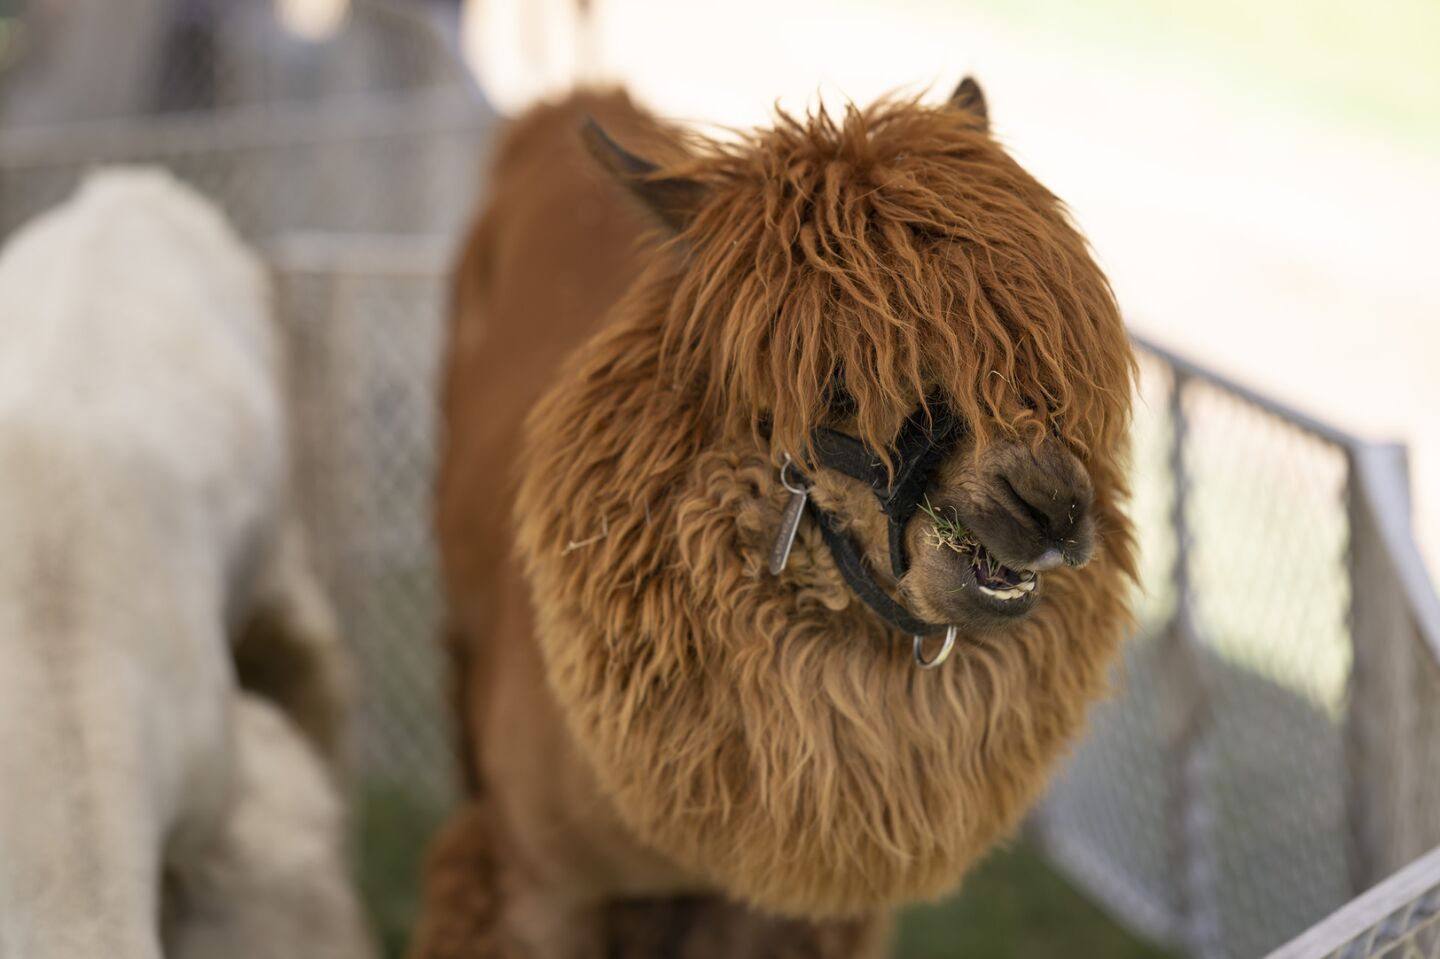 Pacca the Alpaca at the petting zoo